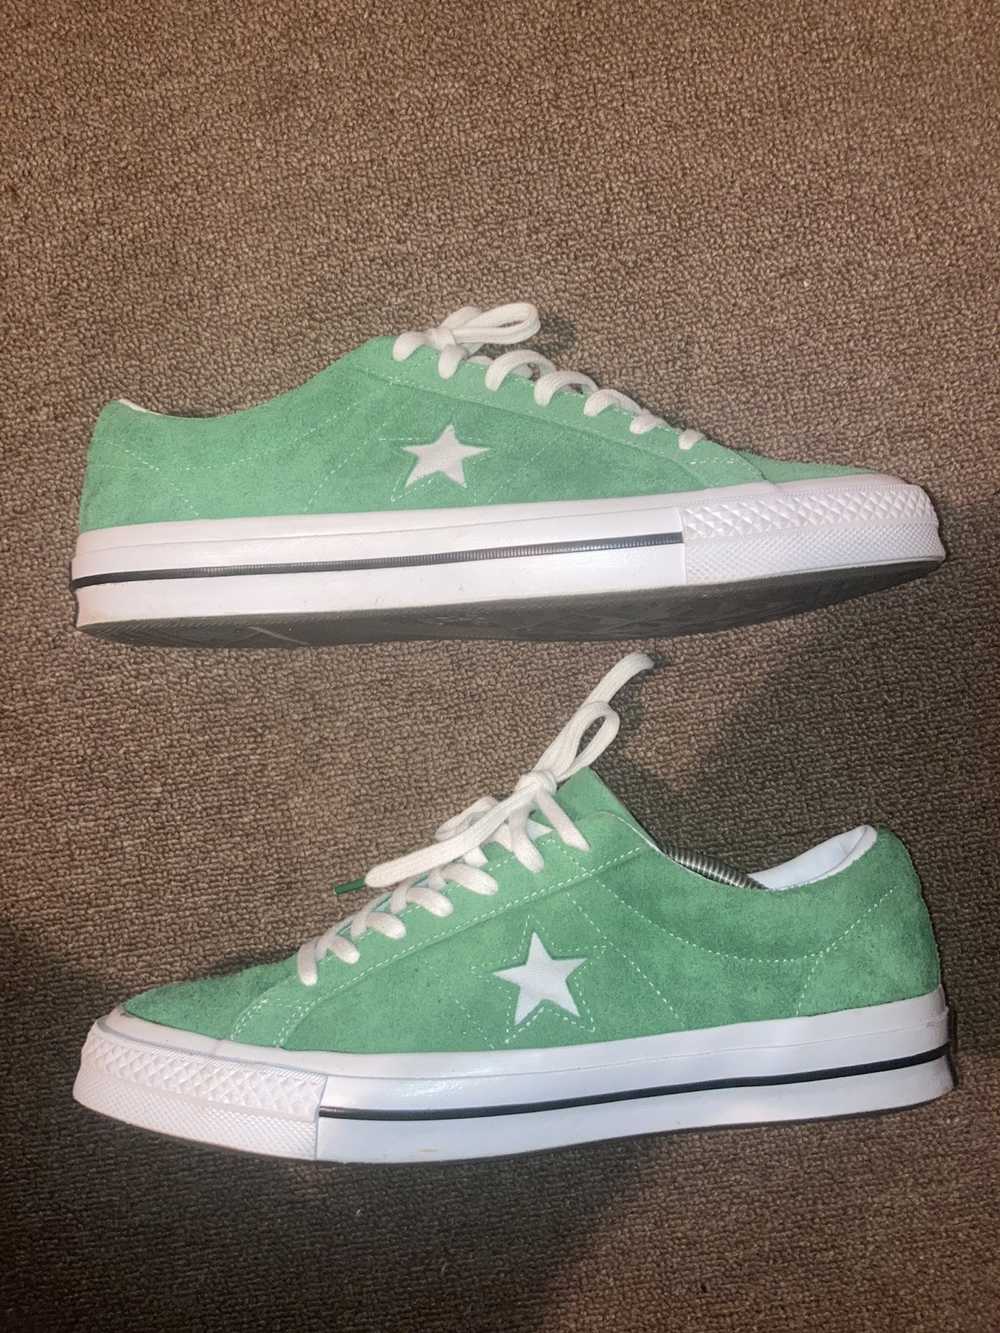 Converse One Star Ox Green Suede - image 1